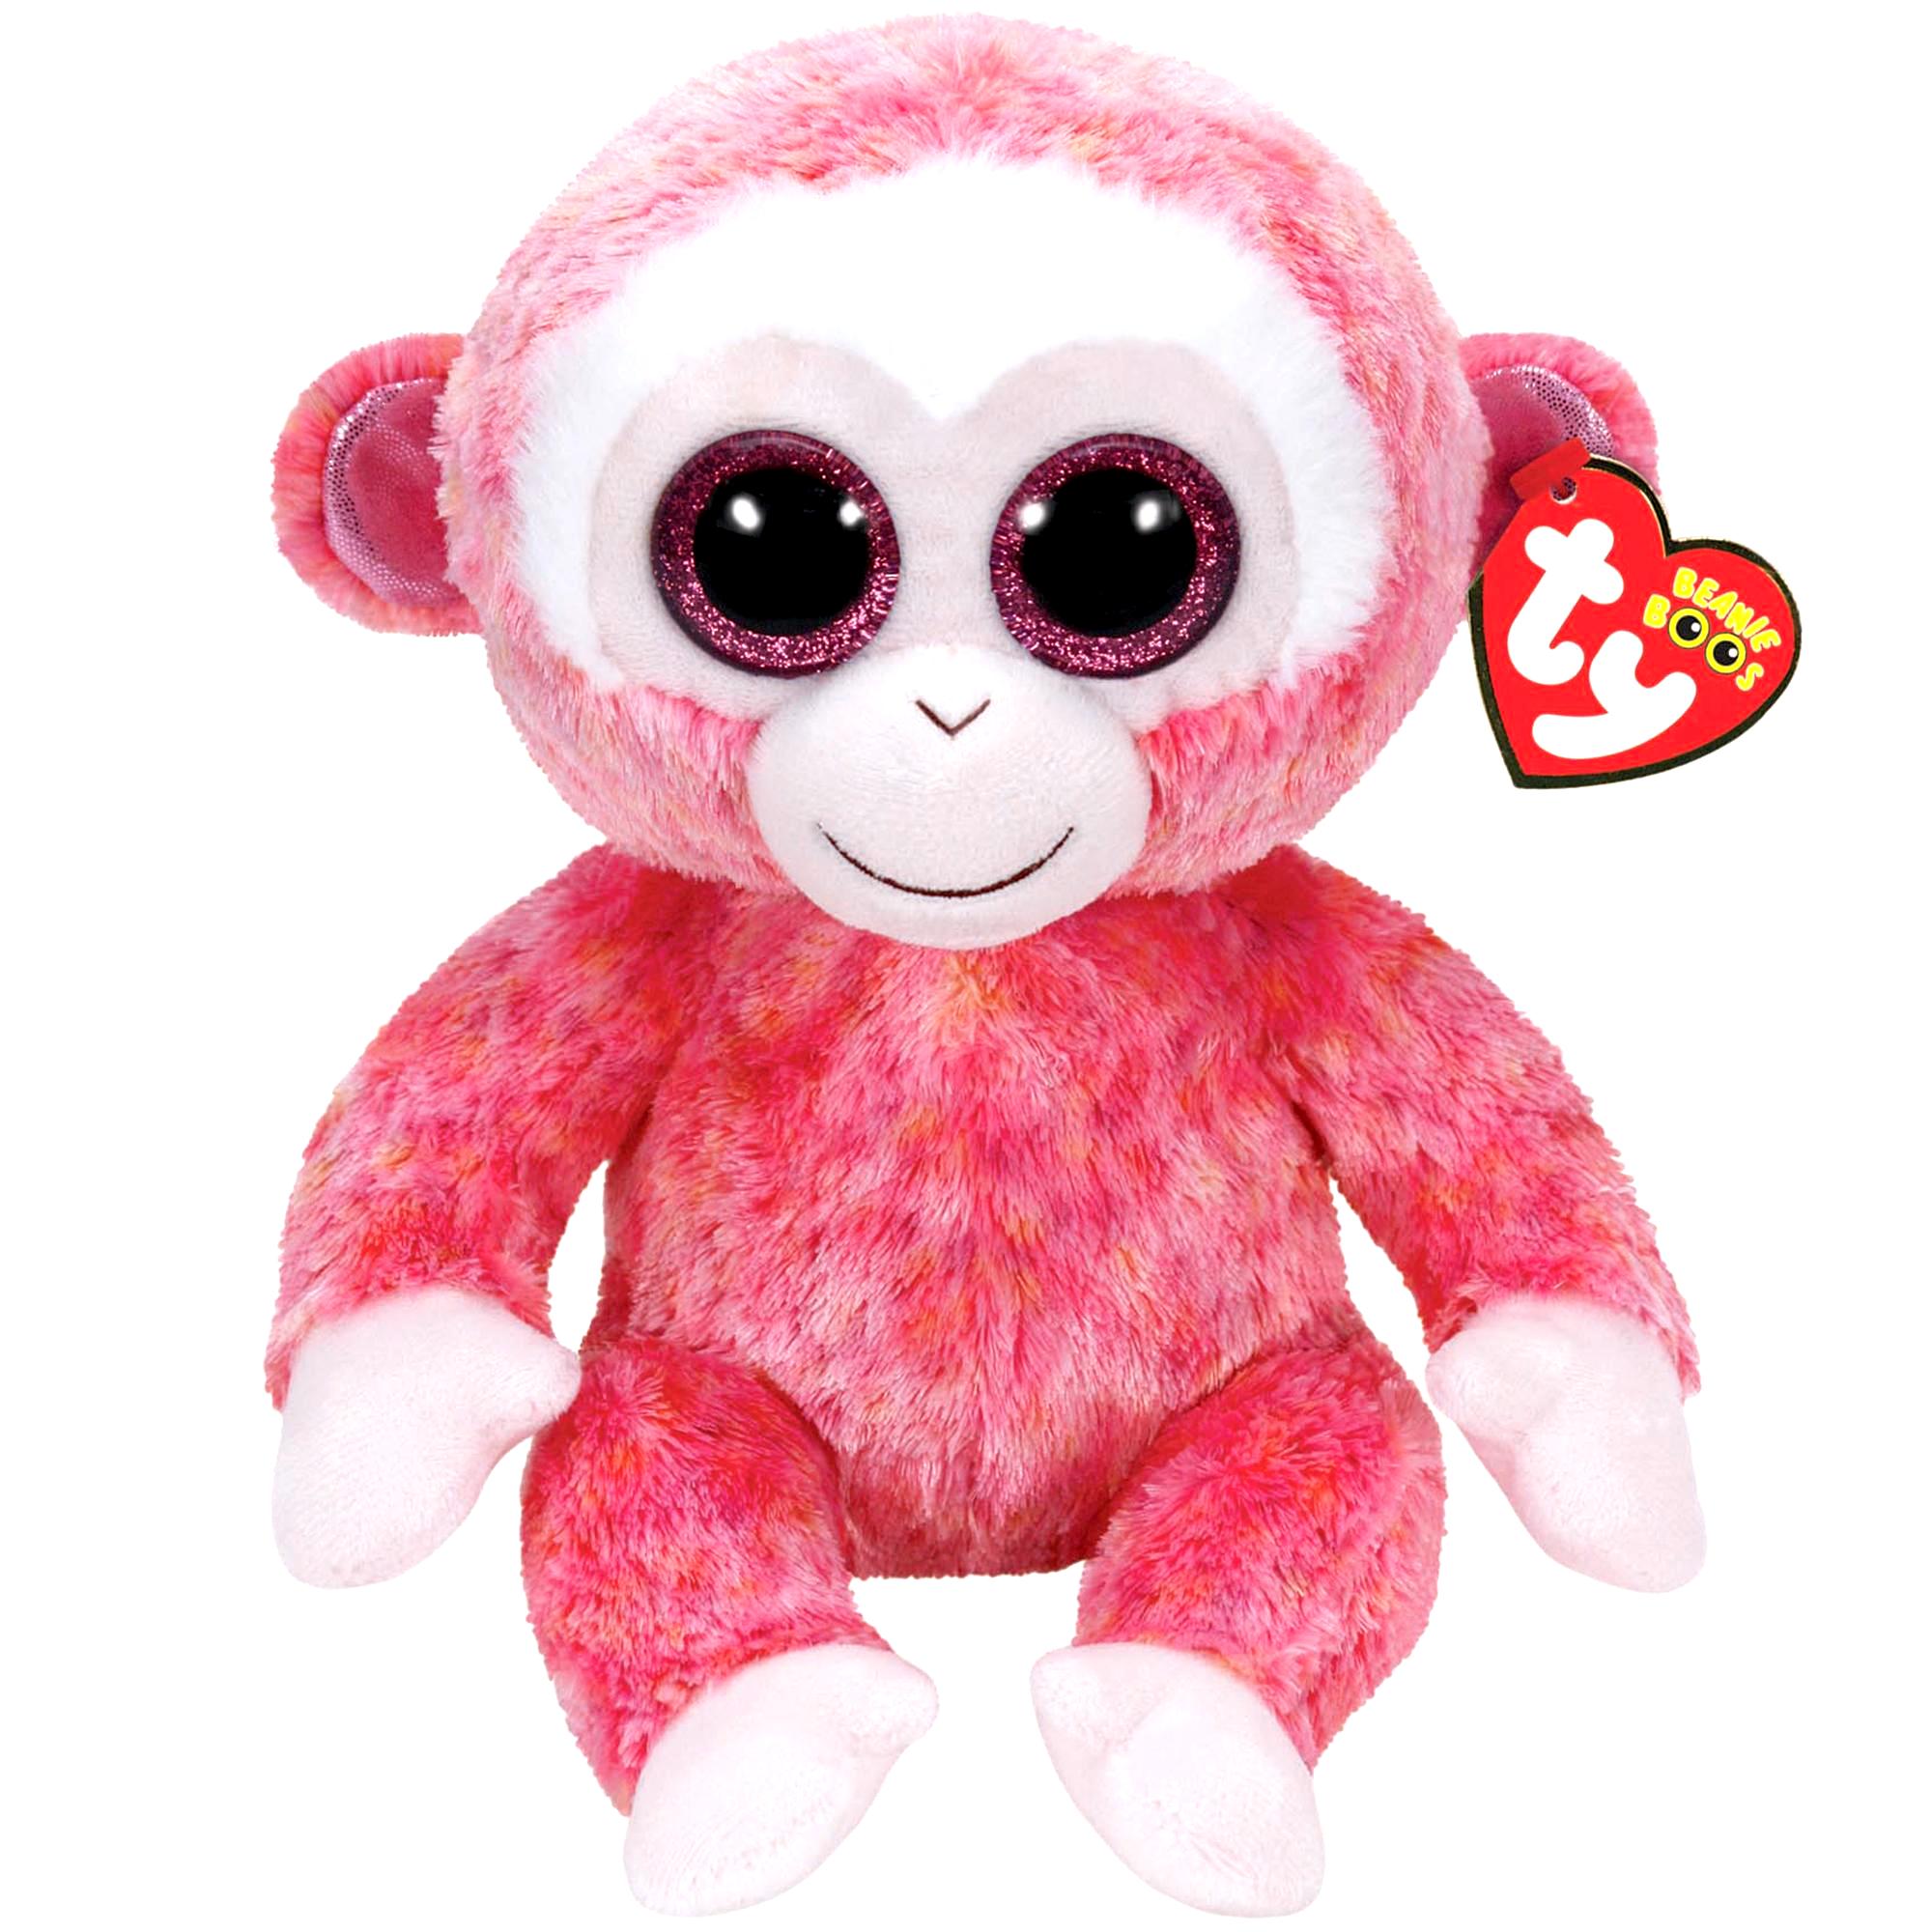 RUBY the 6" MONKEY MINT with MINT TAG TY BEANIE BOOS BOO'S 